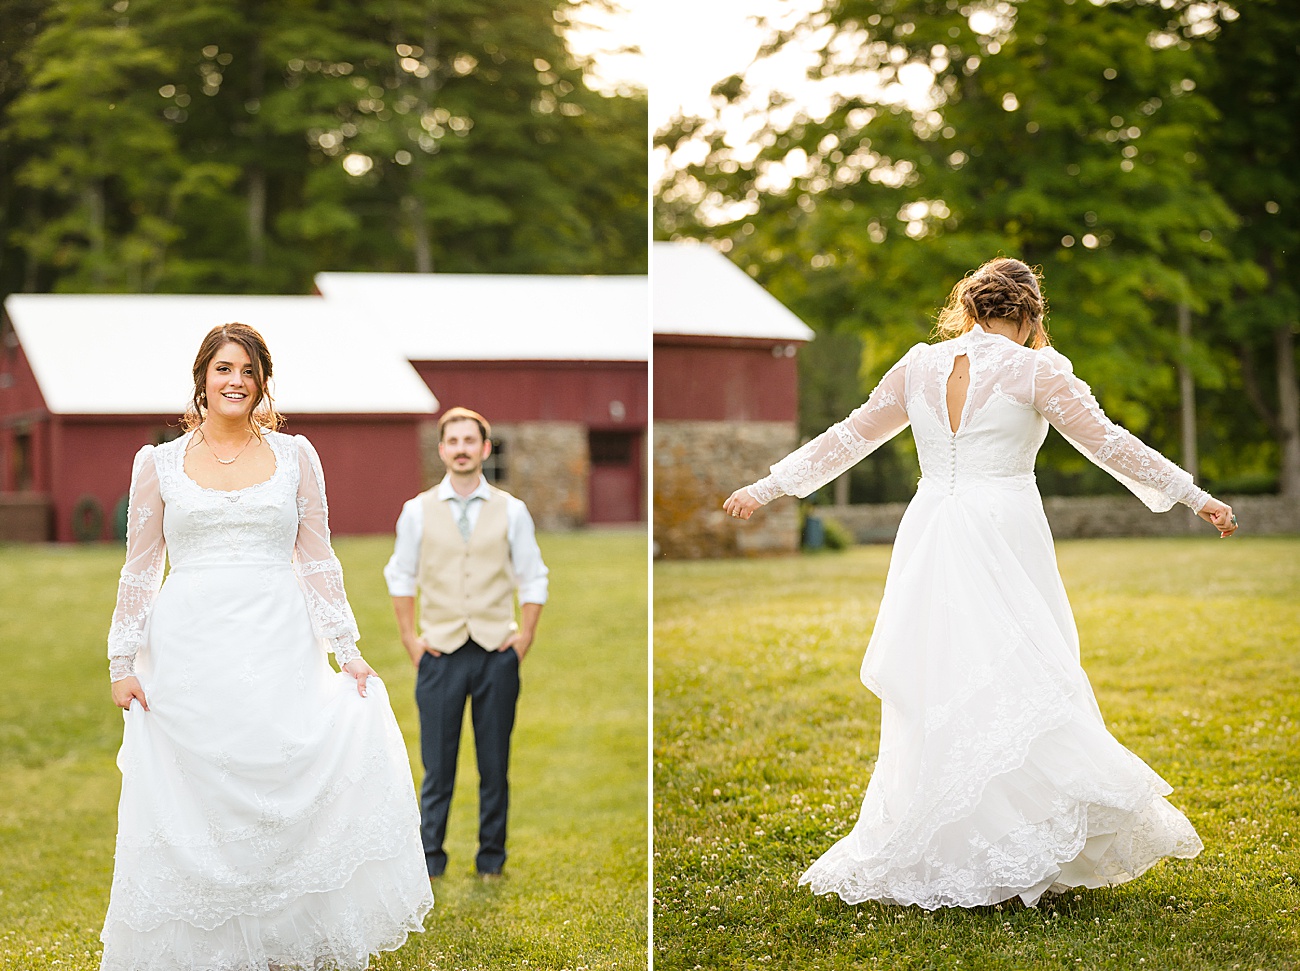 Bride and groom walking at Parmelee Farm Wedding in Killingworth CT by Jamerlyn Brown Photography